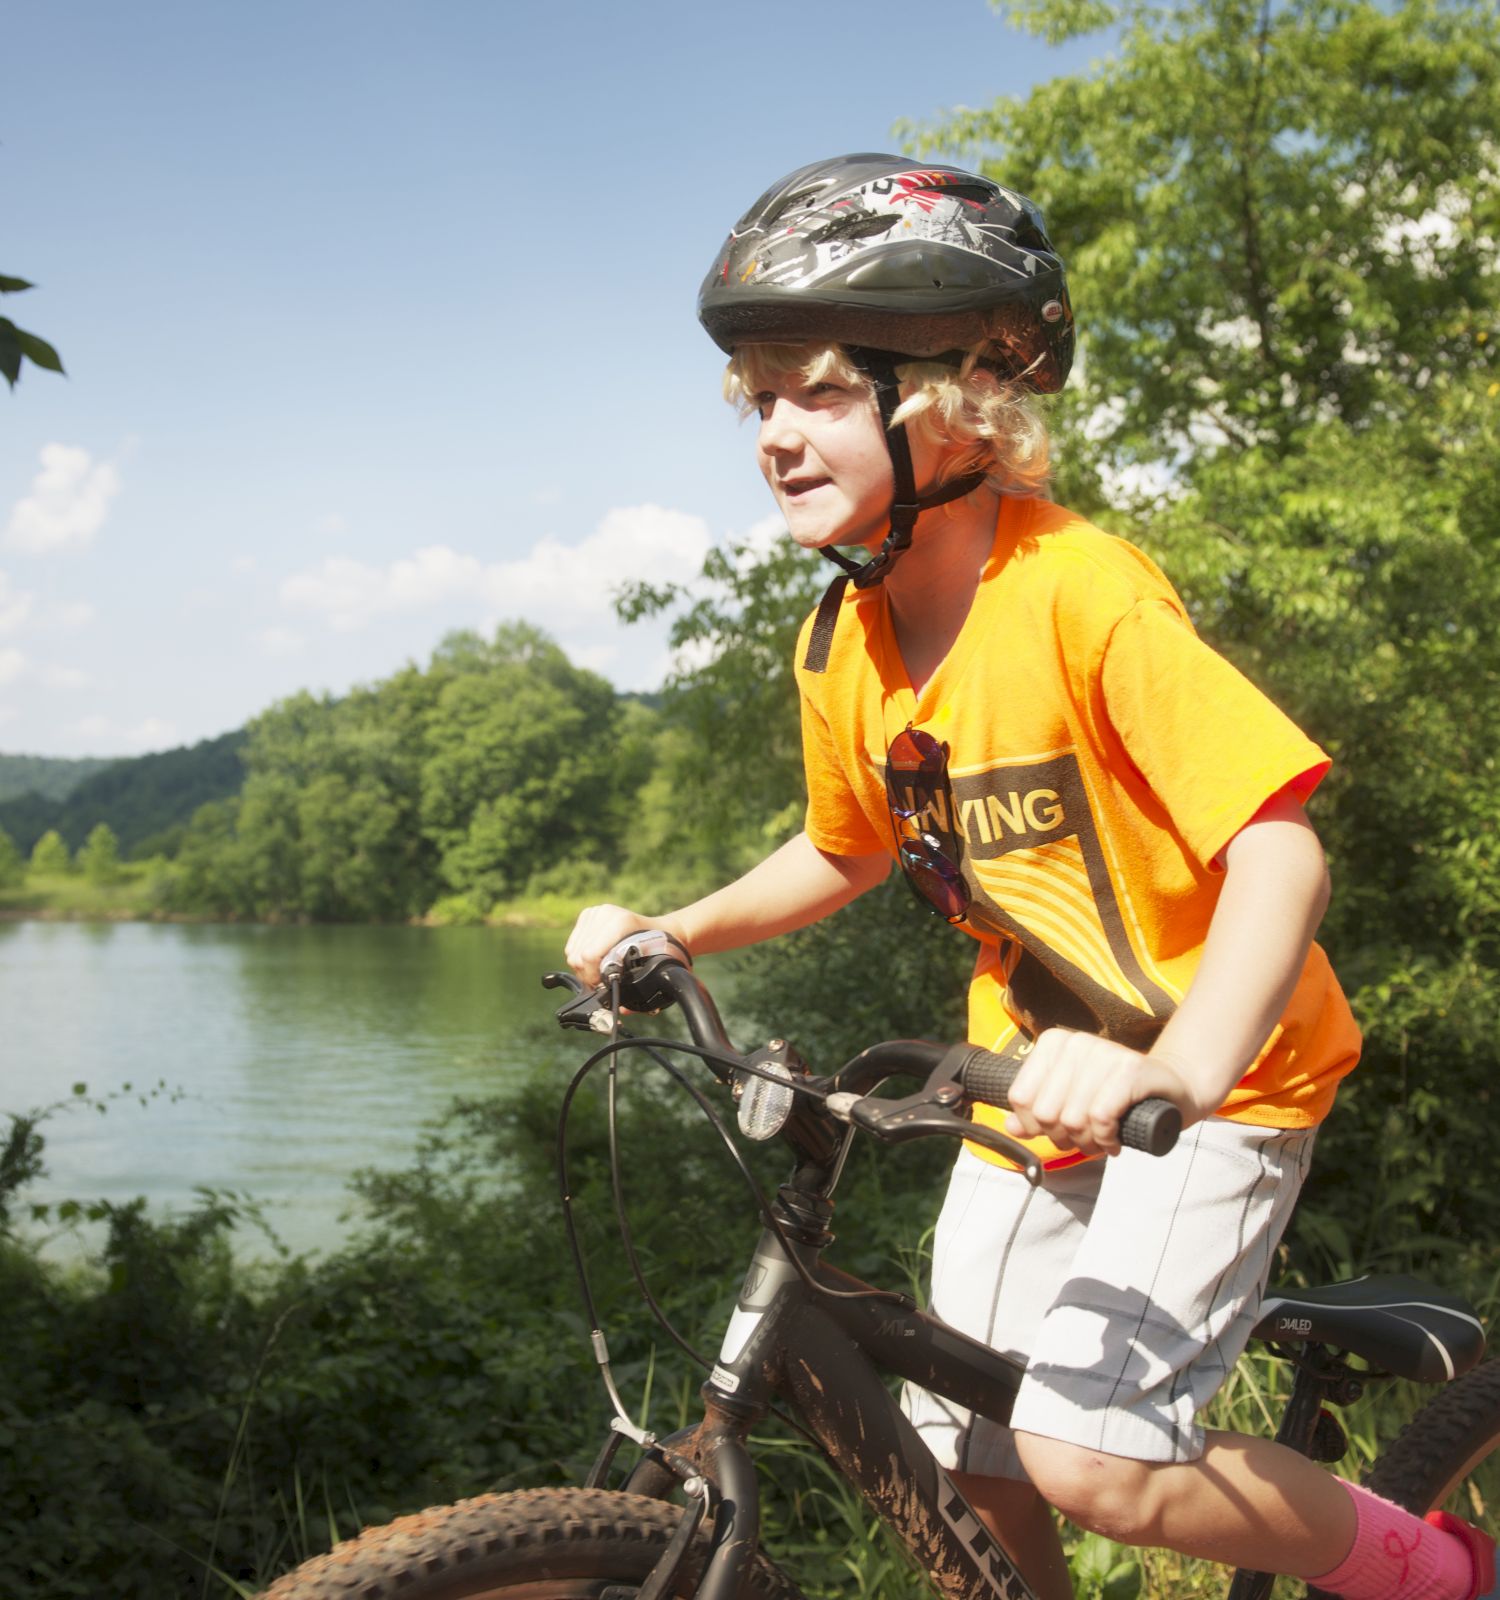 A child wearing a helmet and orange shirt rides a bicycle near a lake, surrounded by lush greenery and hills under a clear sky.